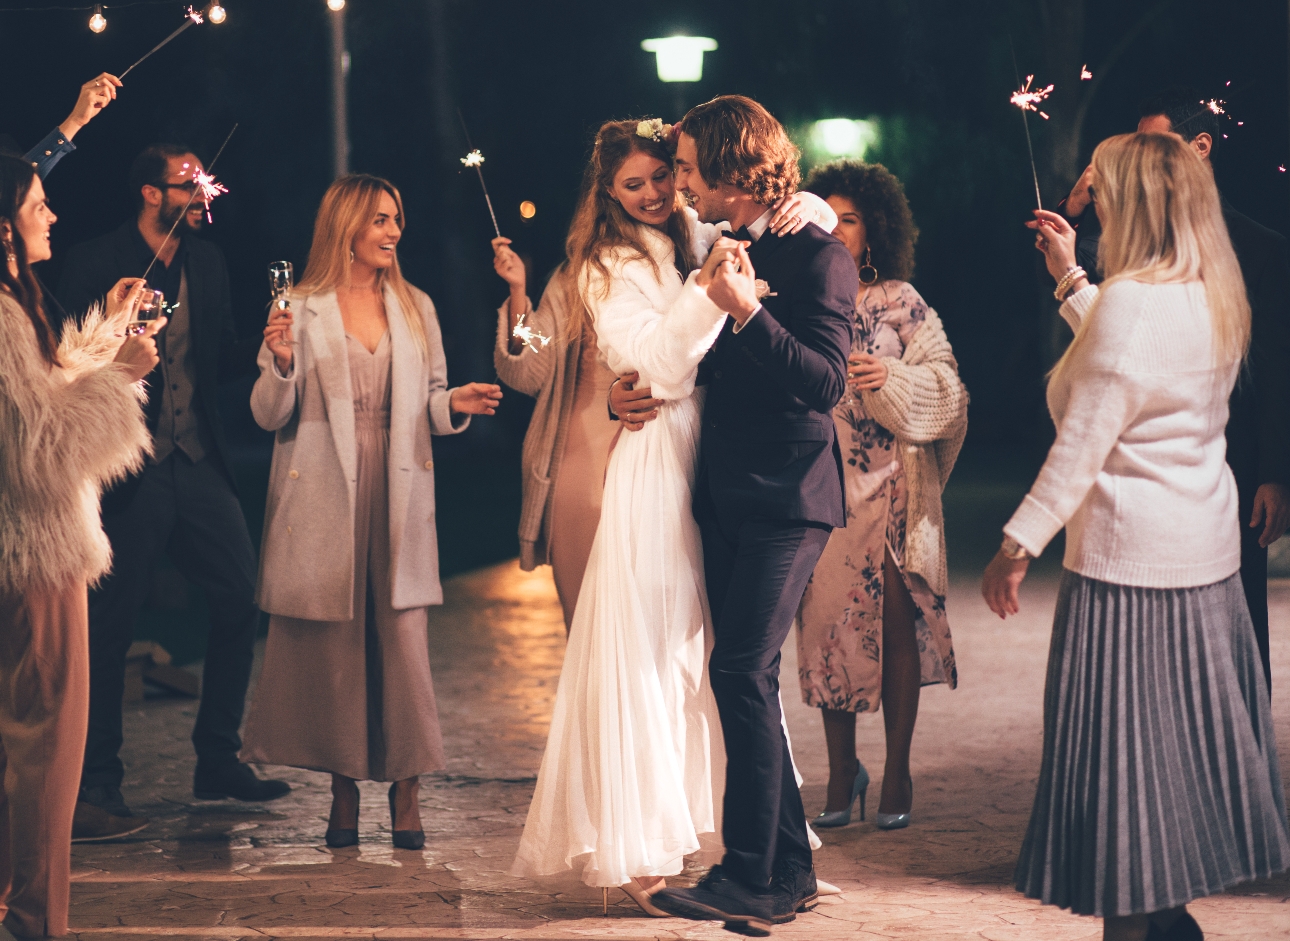 wedding couple dancing outside on their wedding day while guests wave sparklers